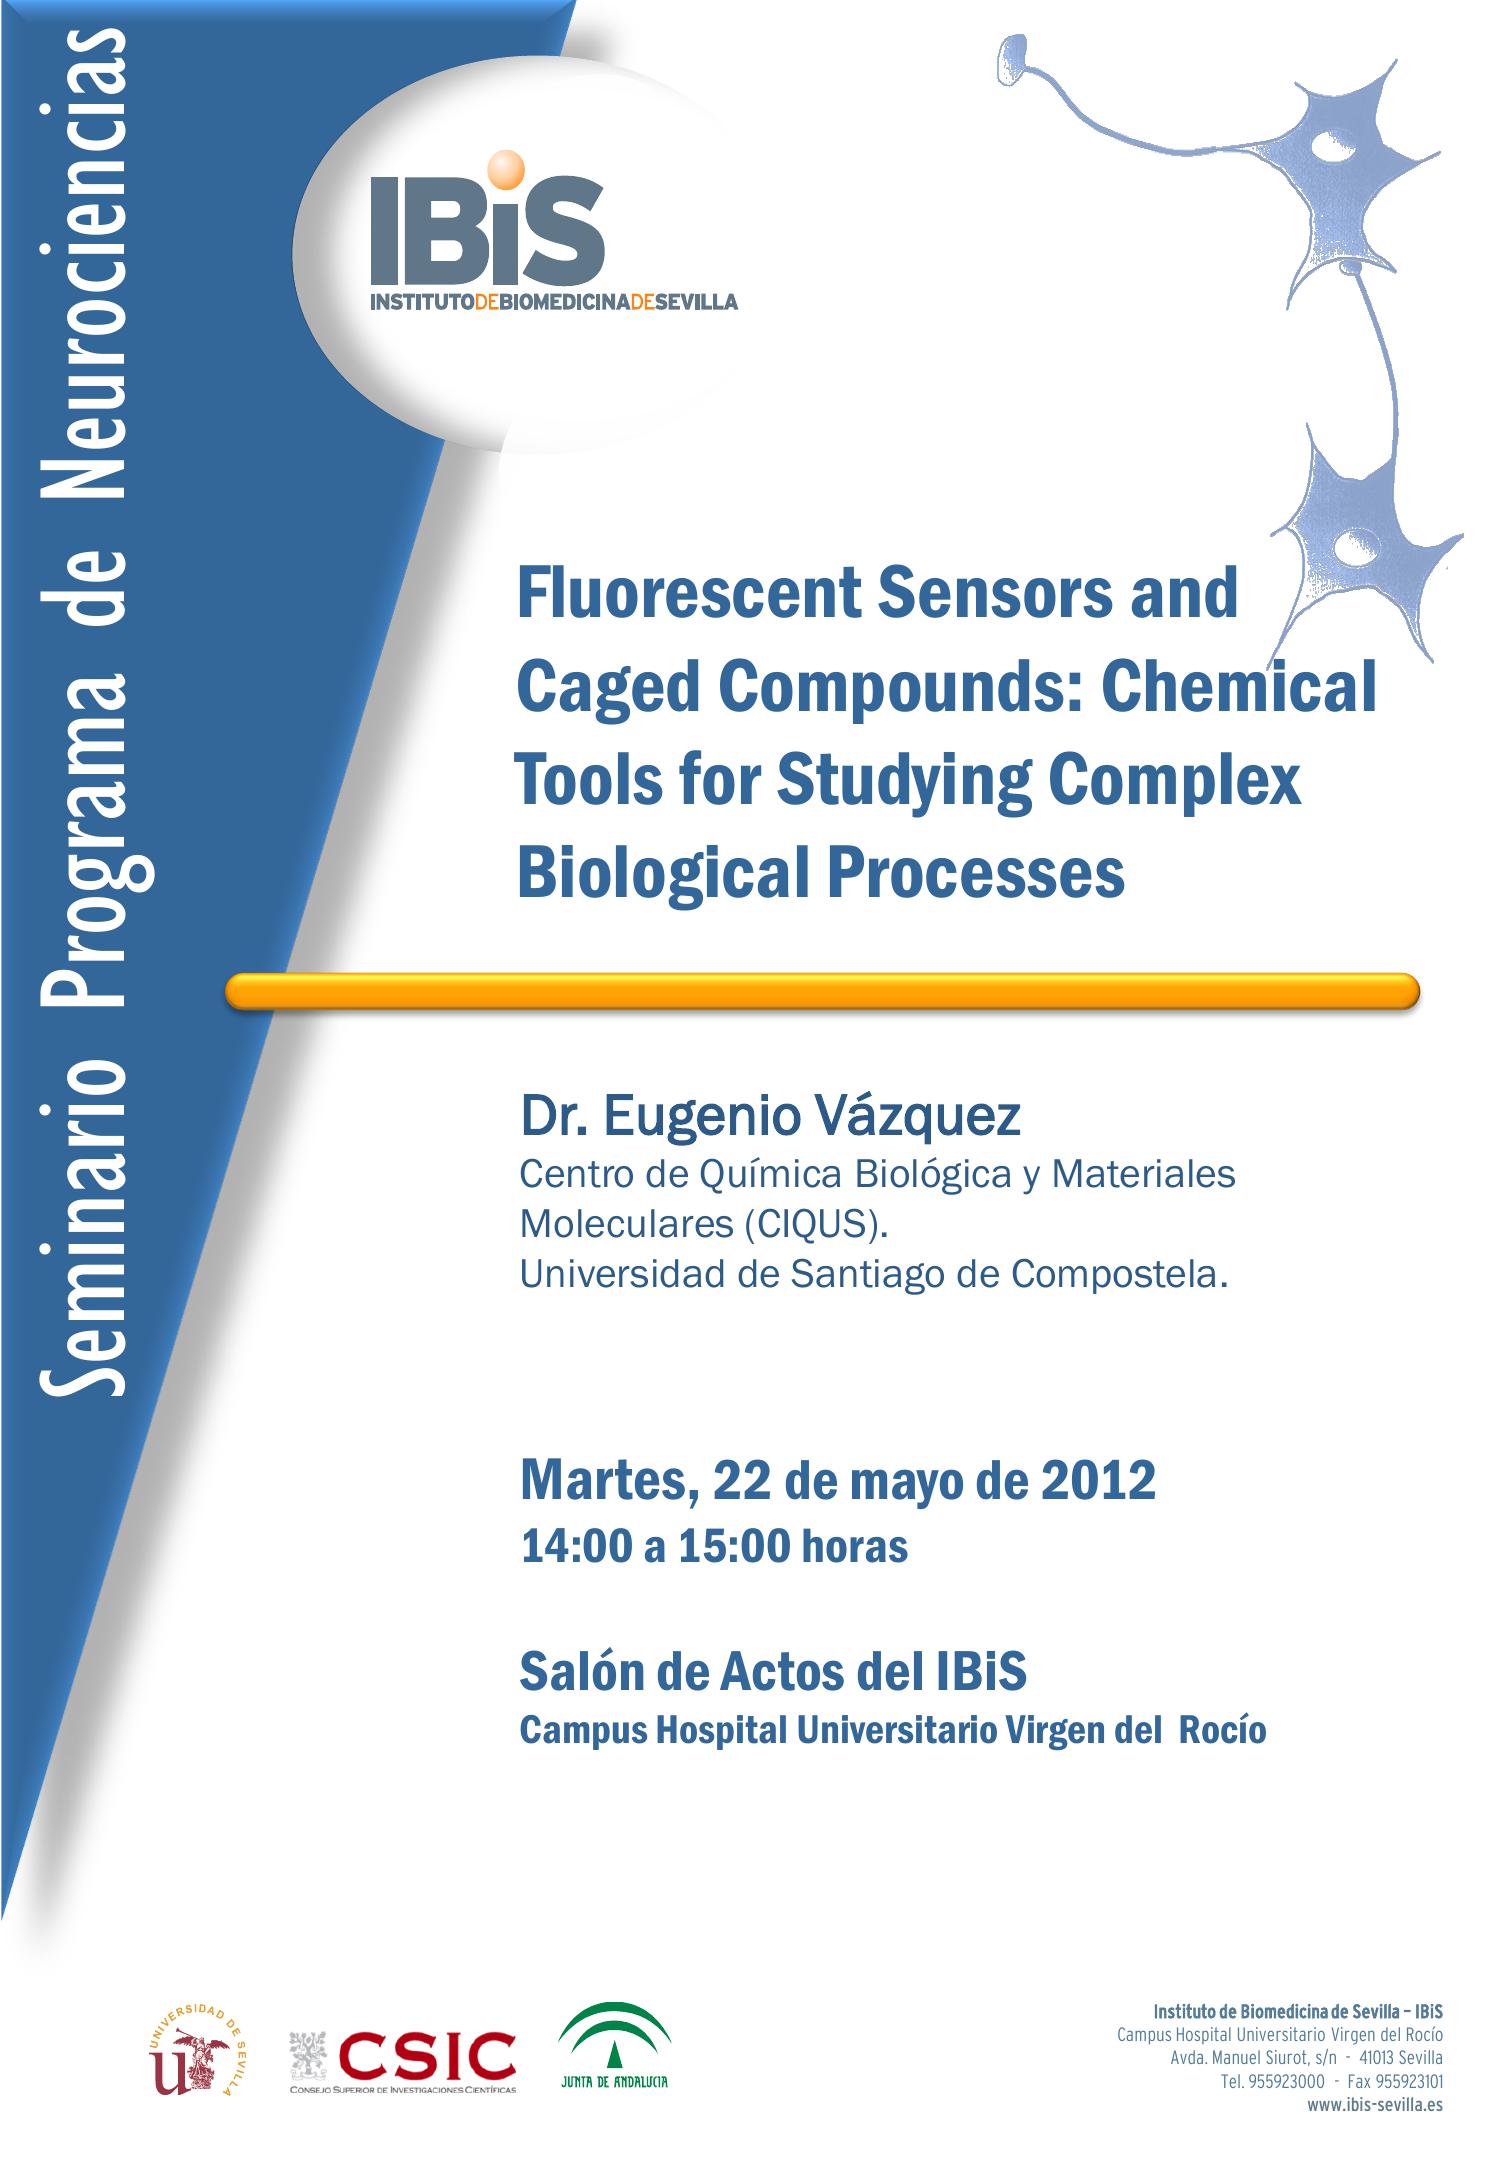 Poster: Fluorescent Sensors and Caged Compounds: Chemical Tools for Studying Complex Biological Processes.